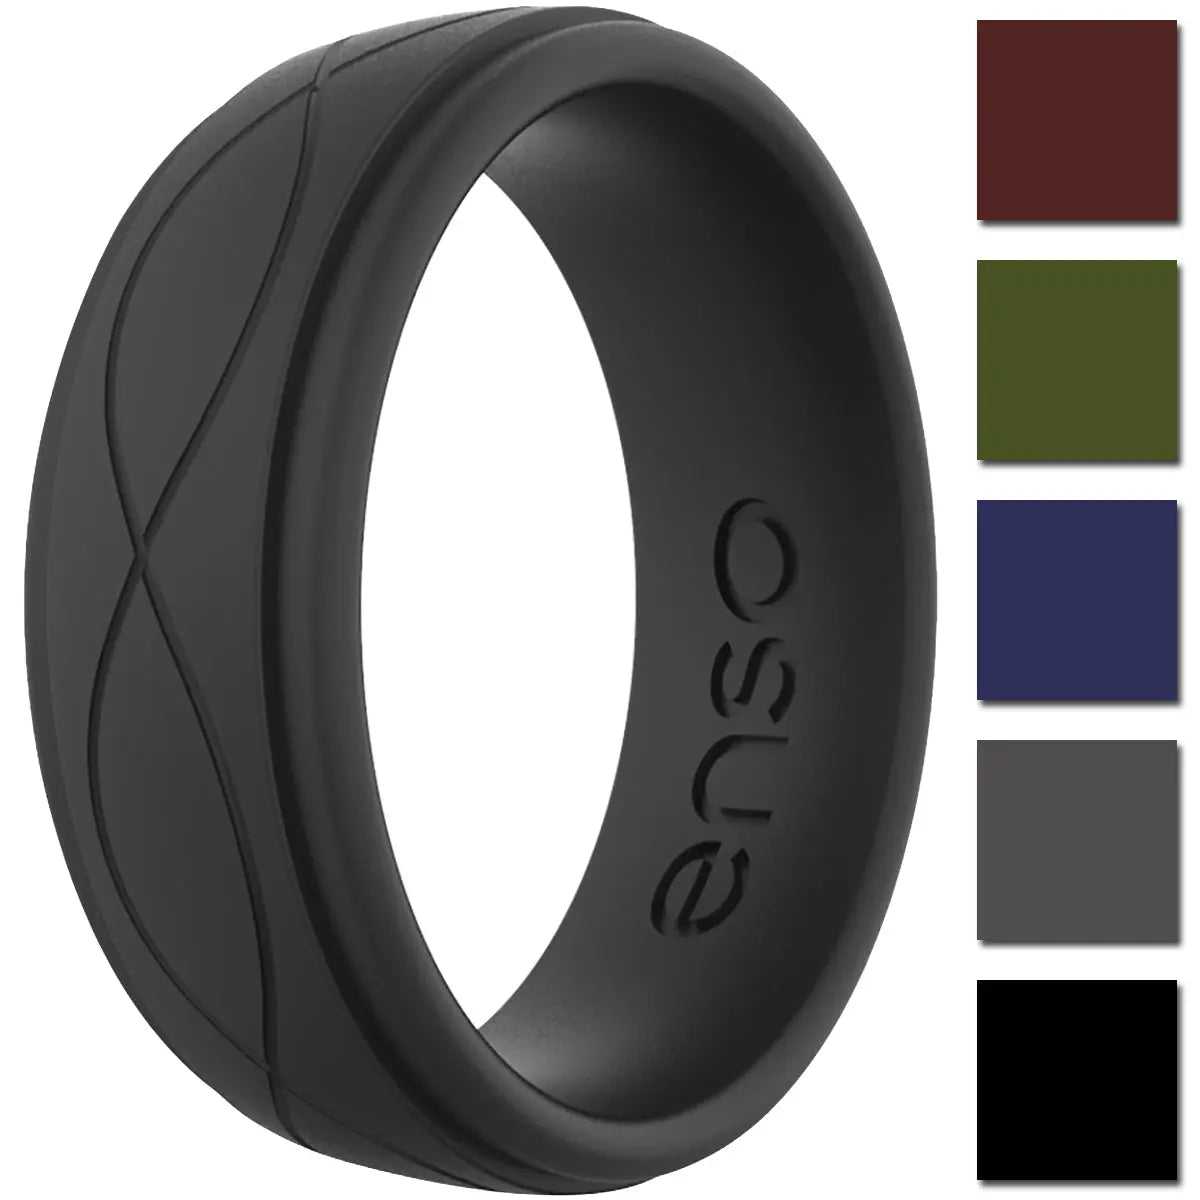 Enso Rings Men's Infinity Series Silicone Ring Enso Rings